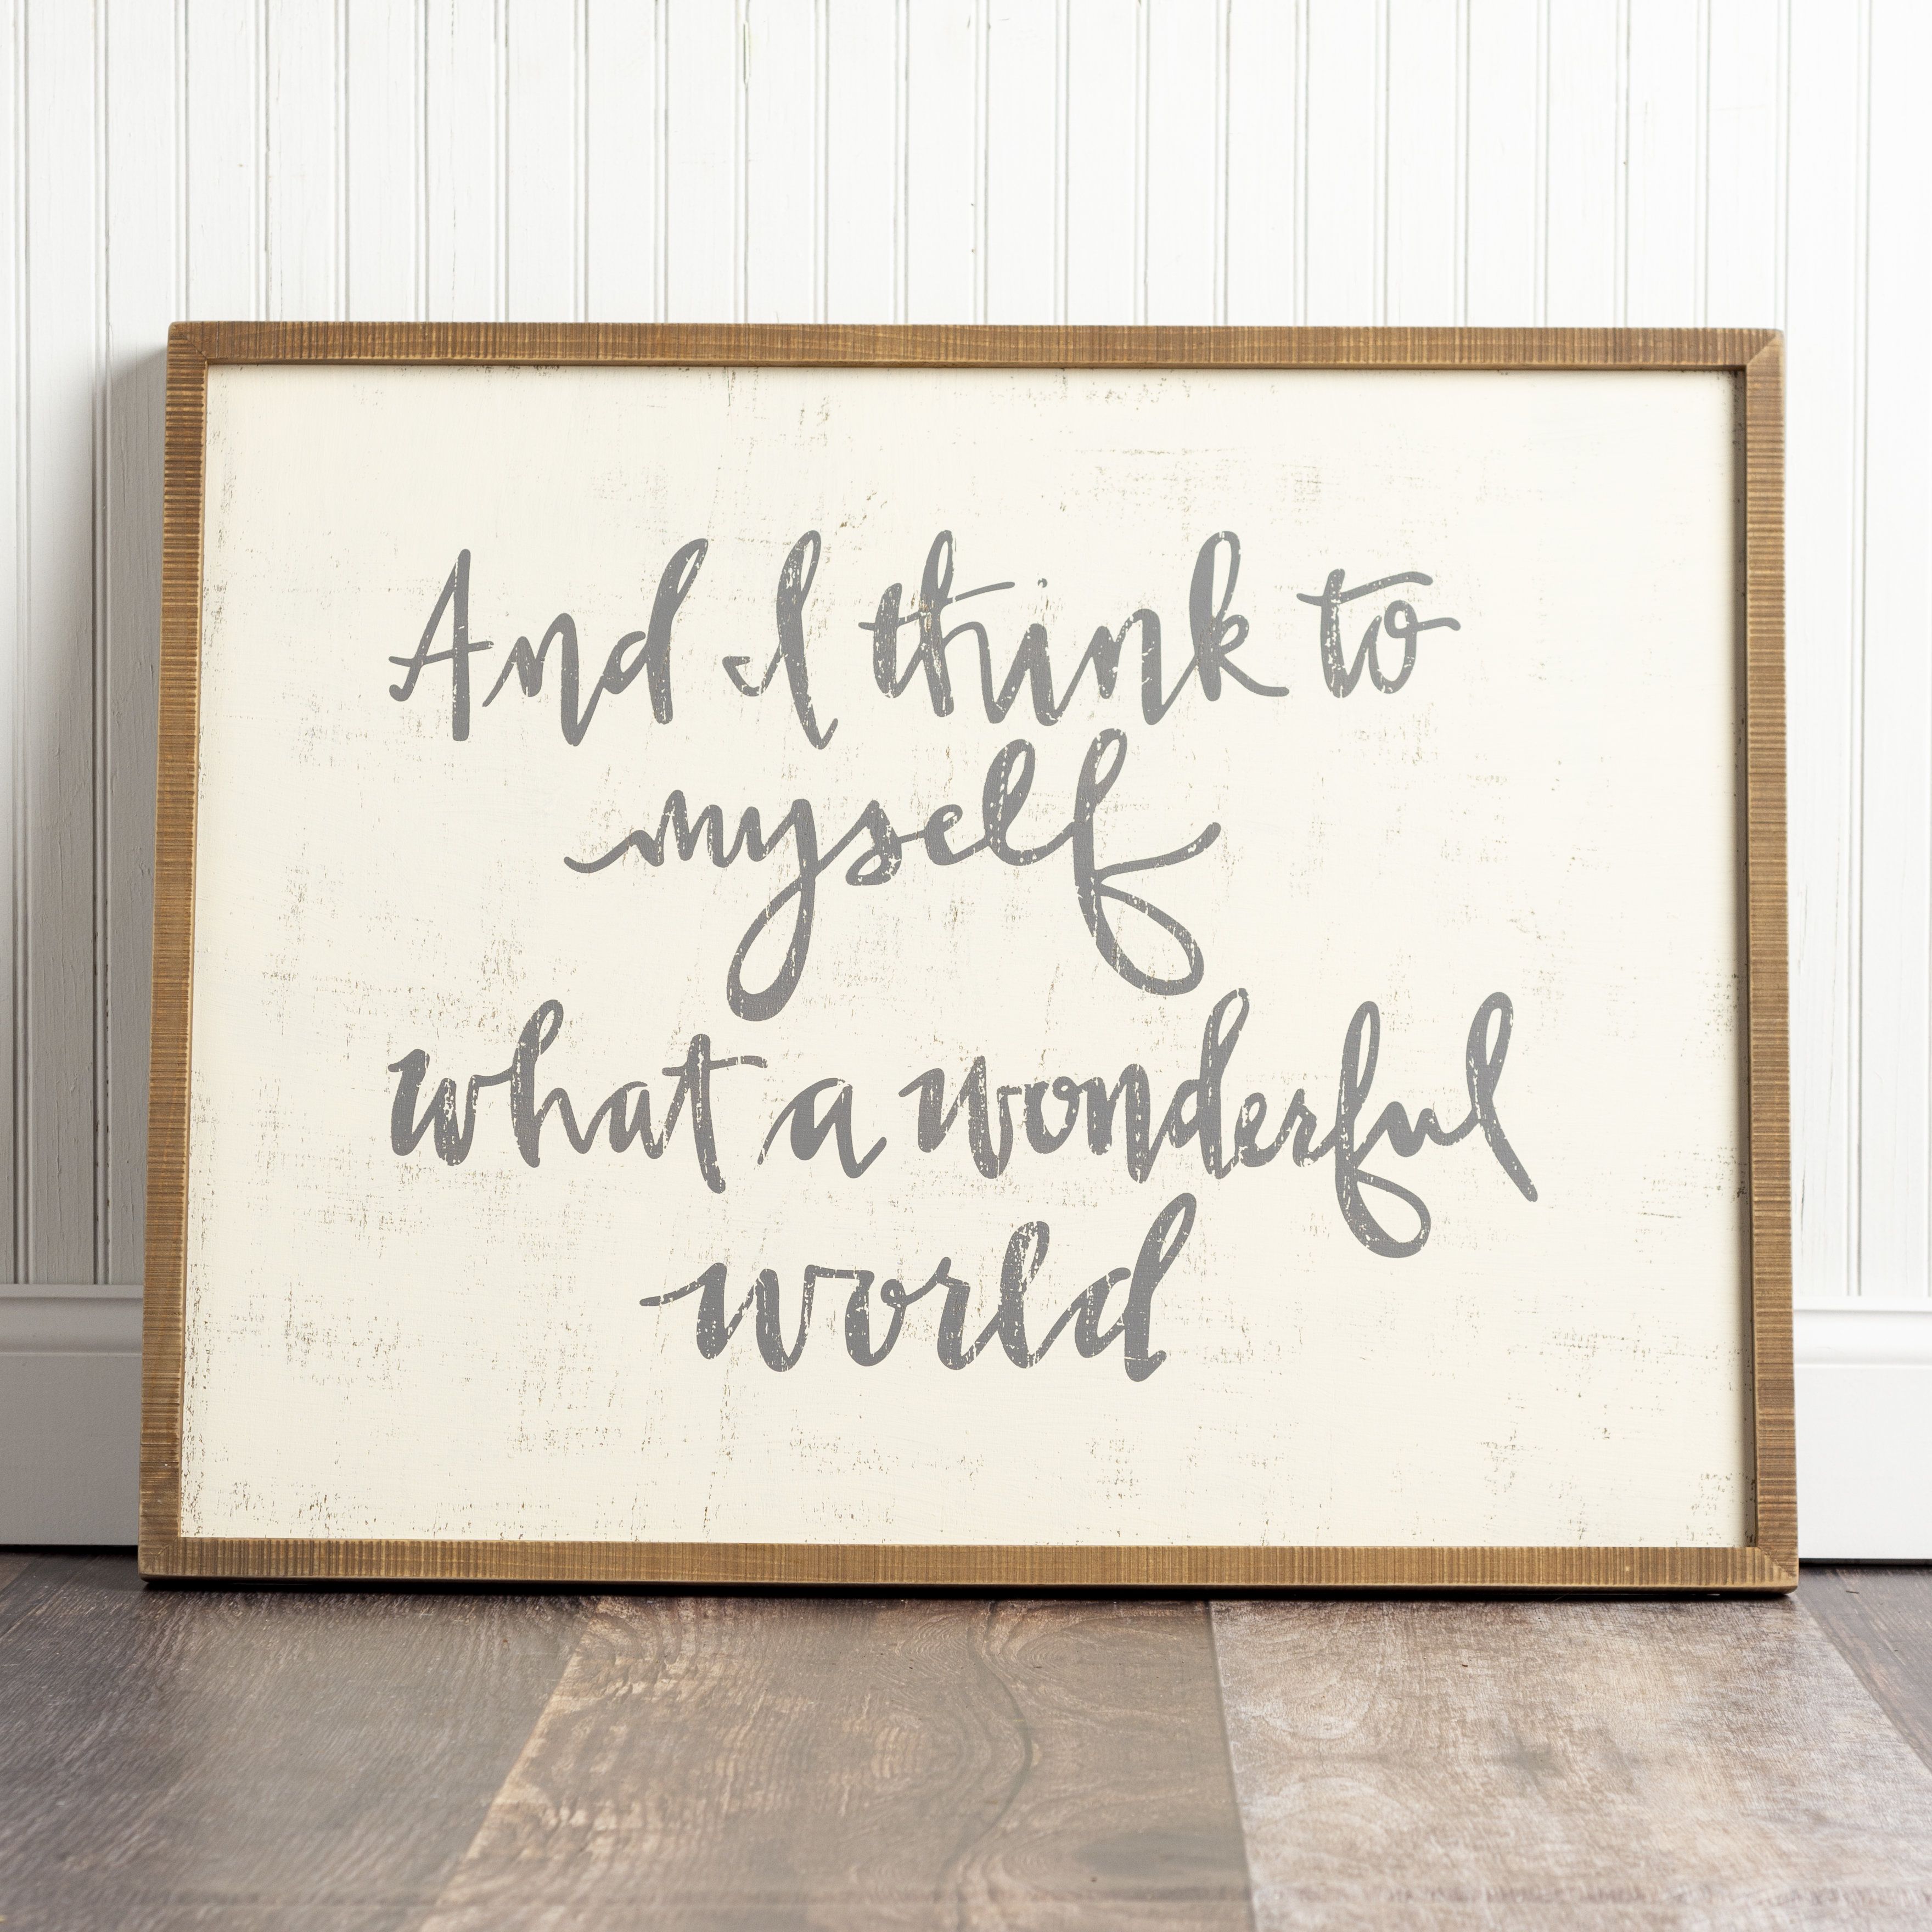 Gracie Oaks And I Think To Myself What A Wonderful World Wall Decor With Wonderful World Wall Decor By Latitude Run (View 29 of 30)